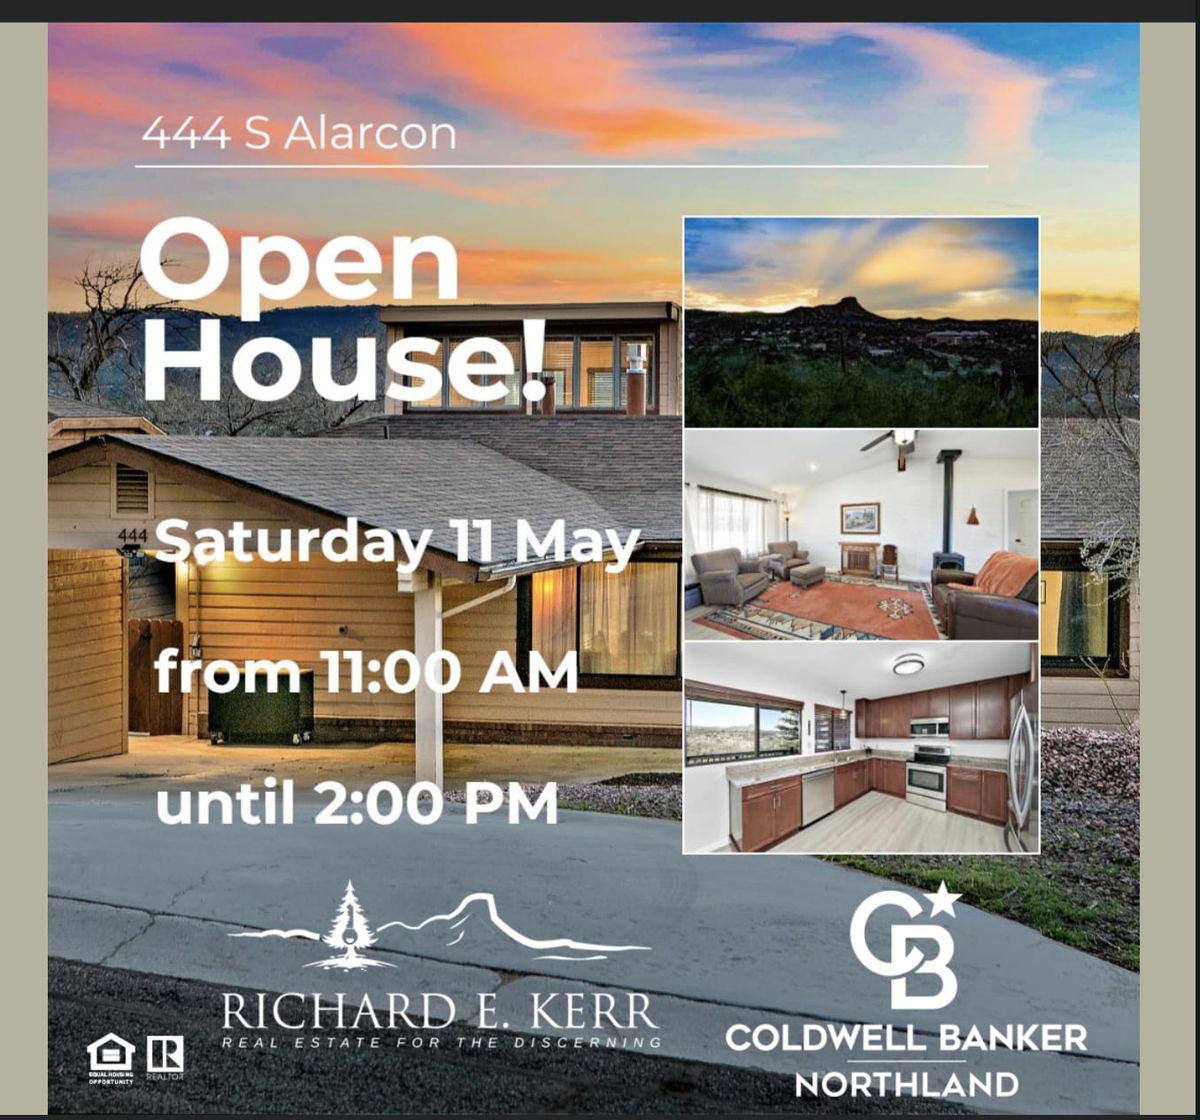 Open House at 444 S Alarcon St